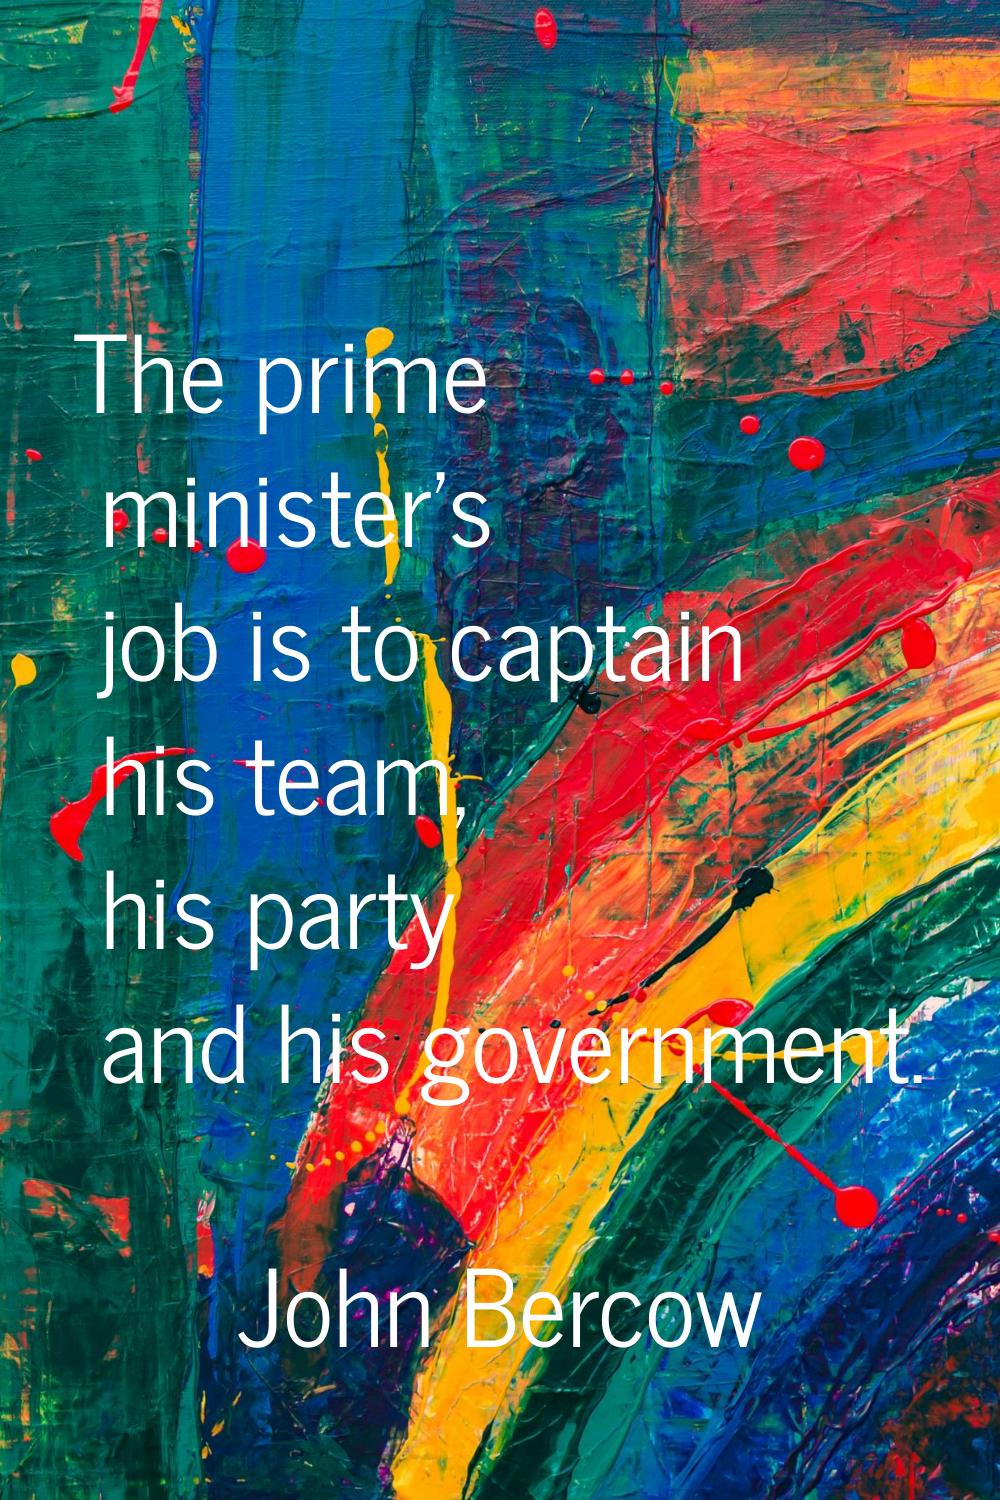 The prime minister's job is to captain his team, his party and his government.